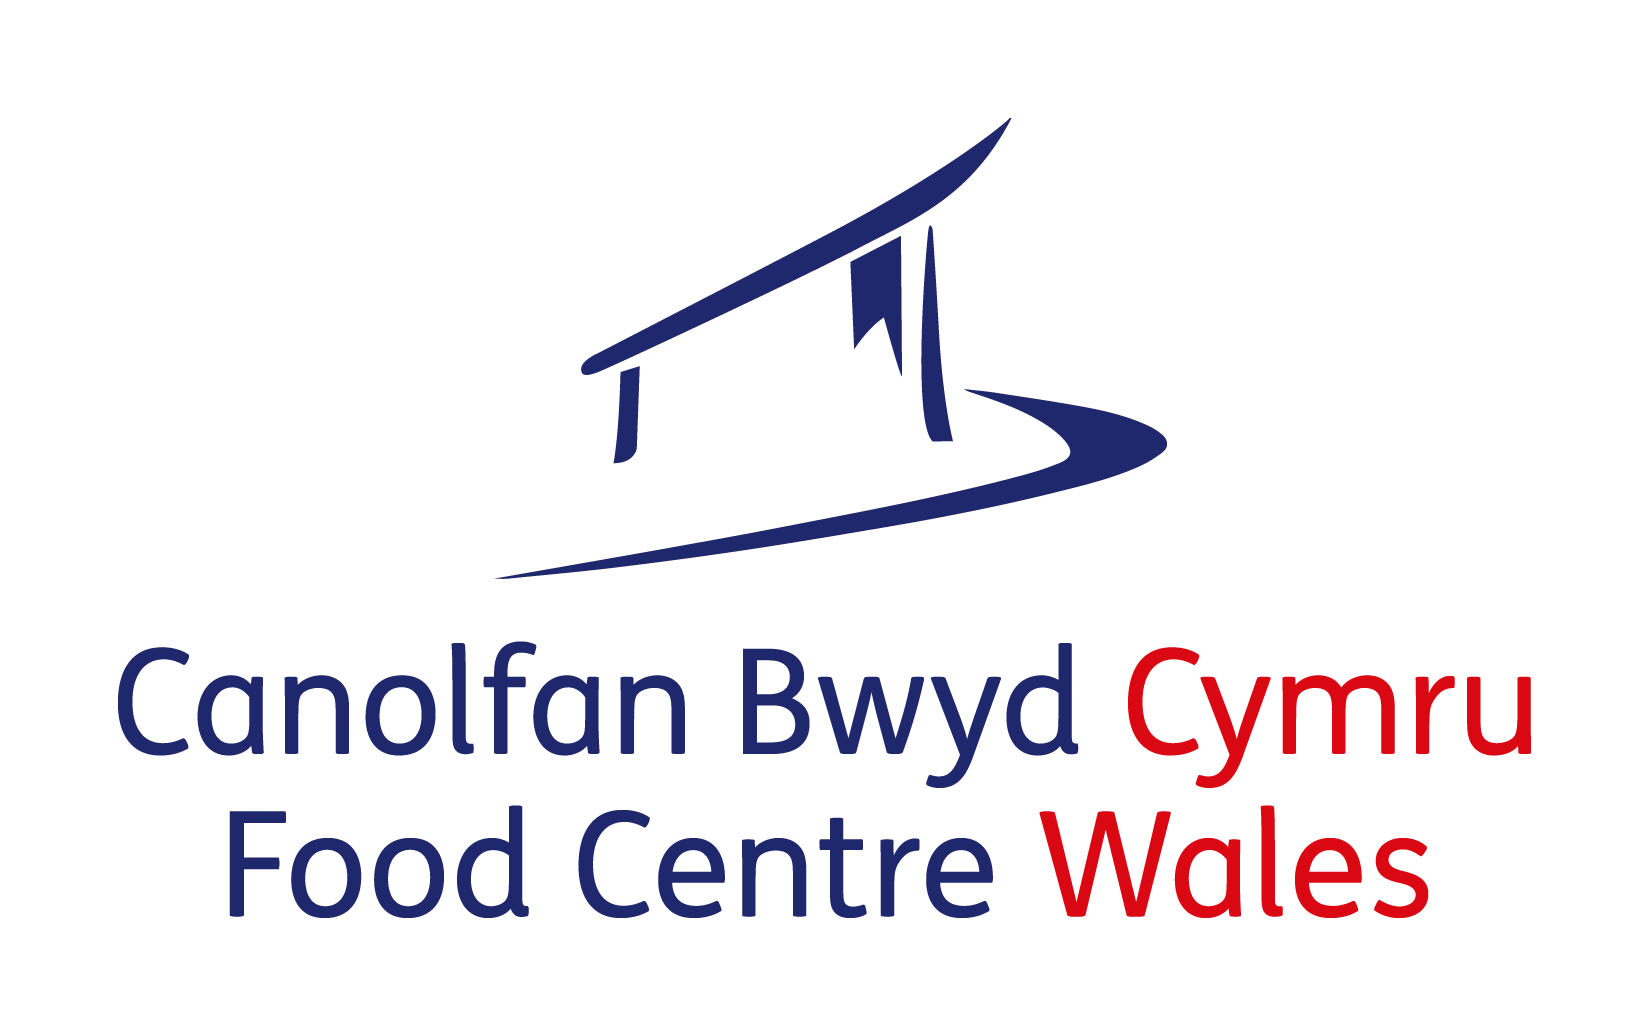 Food Centre Wales